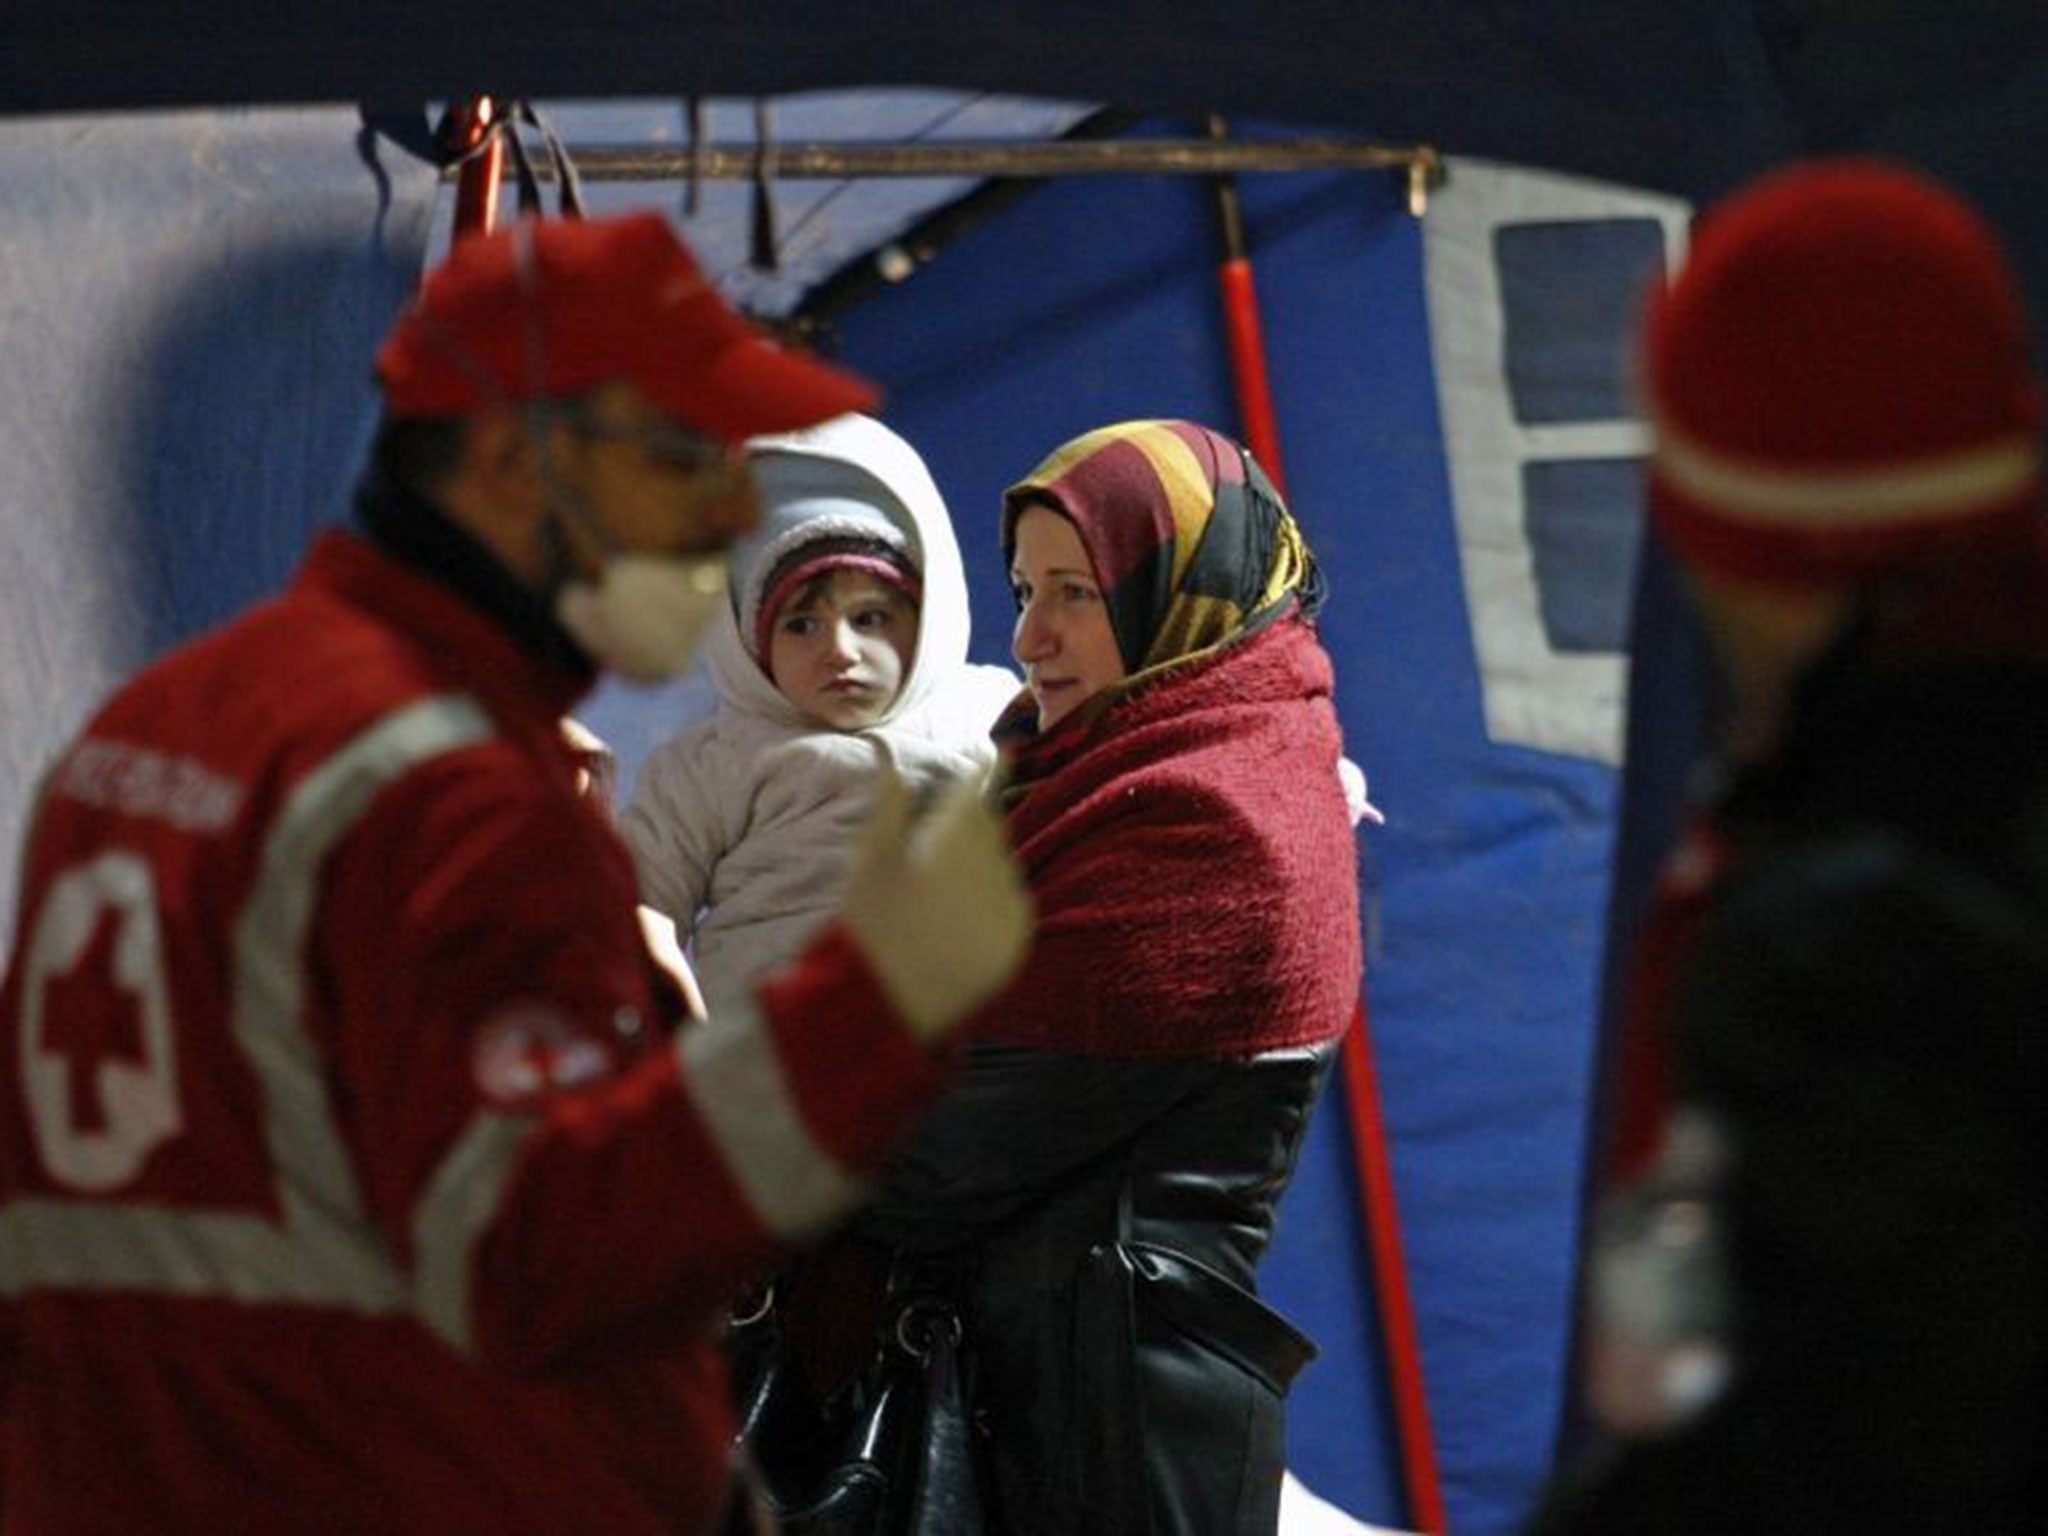 Migrants receive medical assistance after disembarking from the Ezadeen at the Corigliano Calabro harbour on 3 January